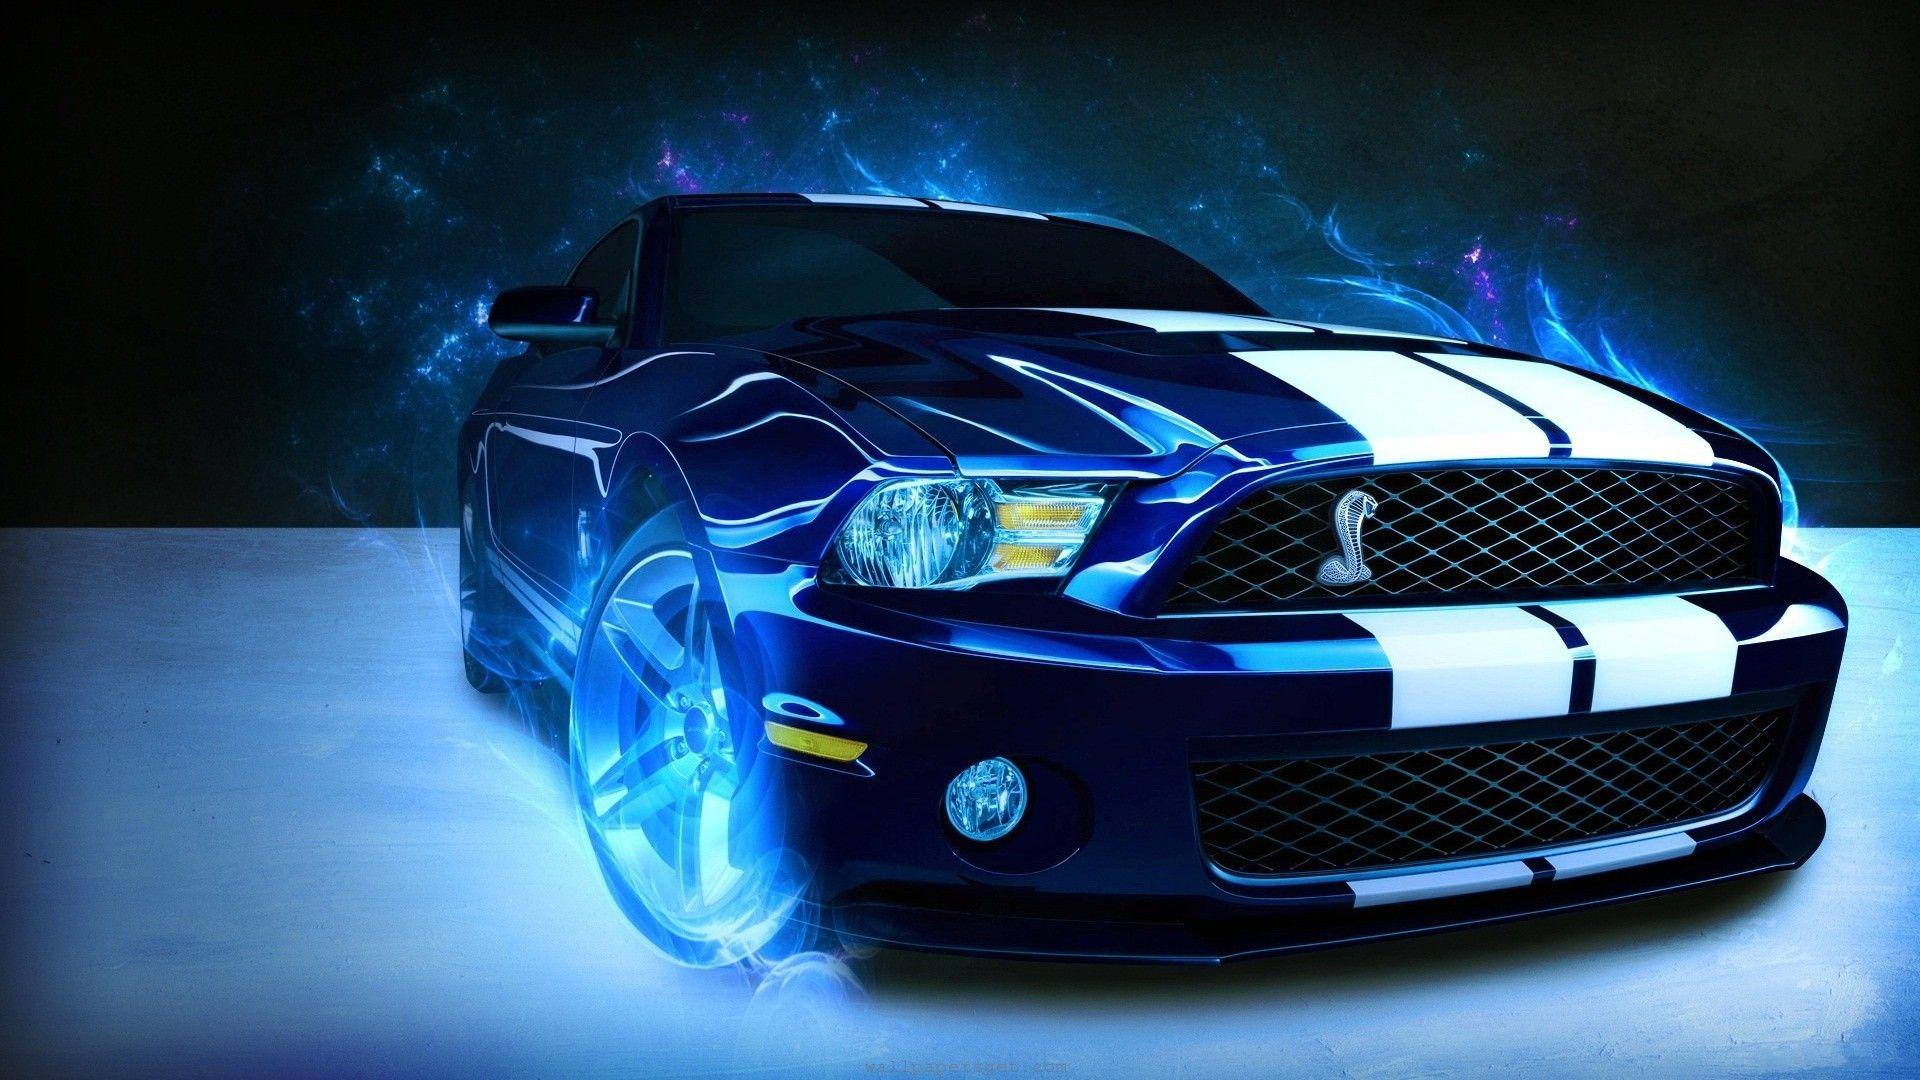 Ford Mustang Blue Laptop Wallpaper Free Ford Mustang Blue Laptop Background